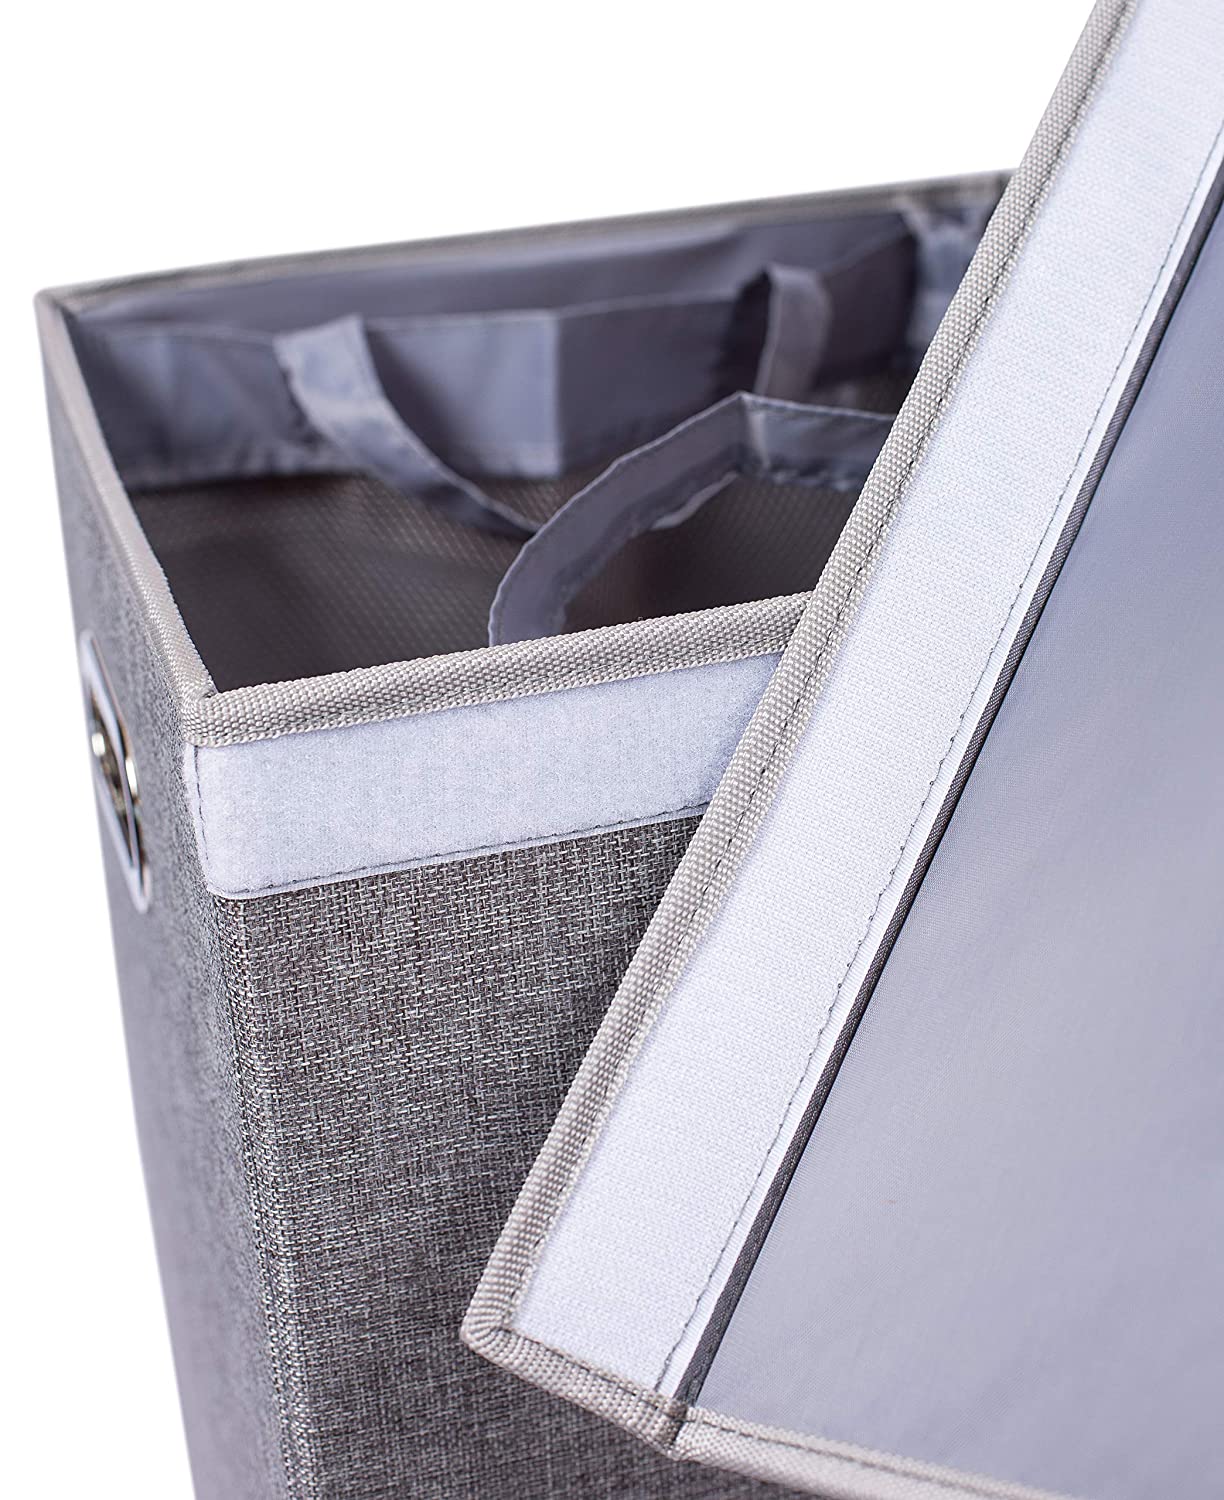 BirdRock Home Double Linen Laundry Hamper with Lid and Removable Liners - Grey - image 4 of 10